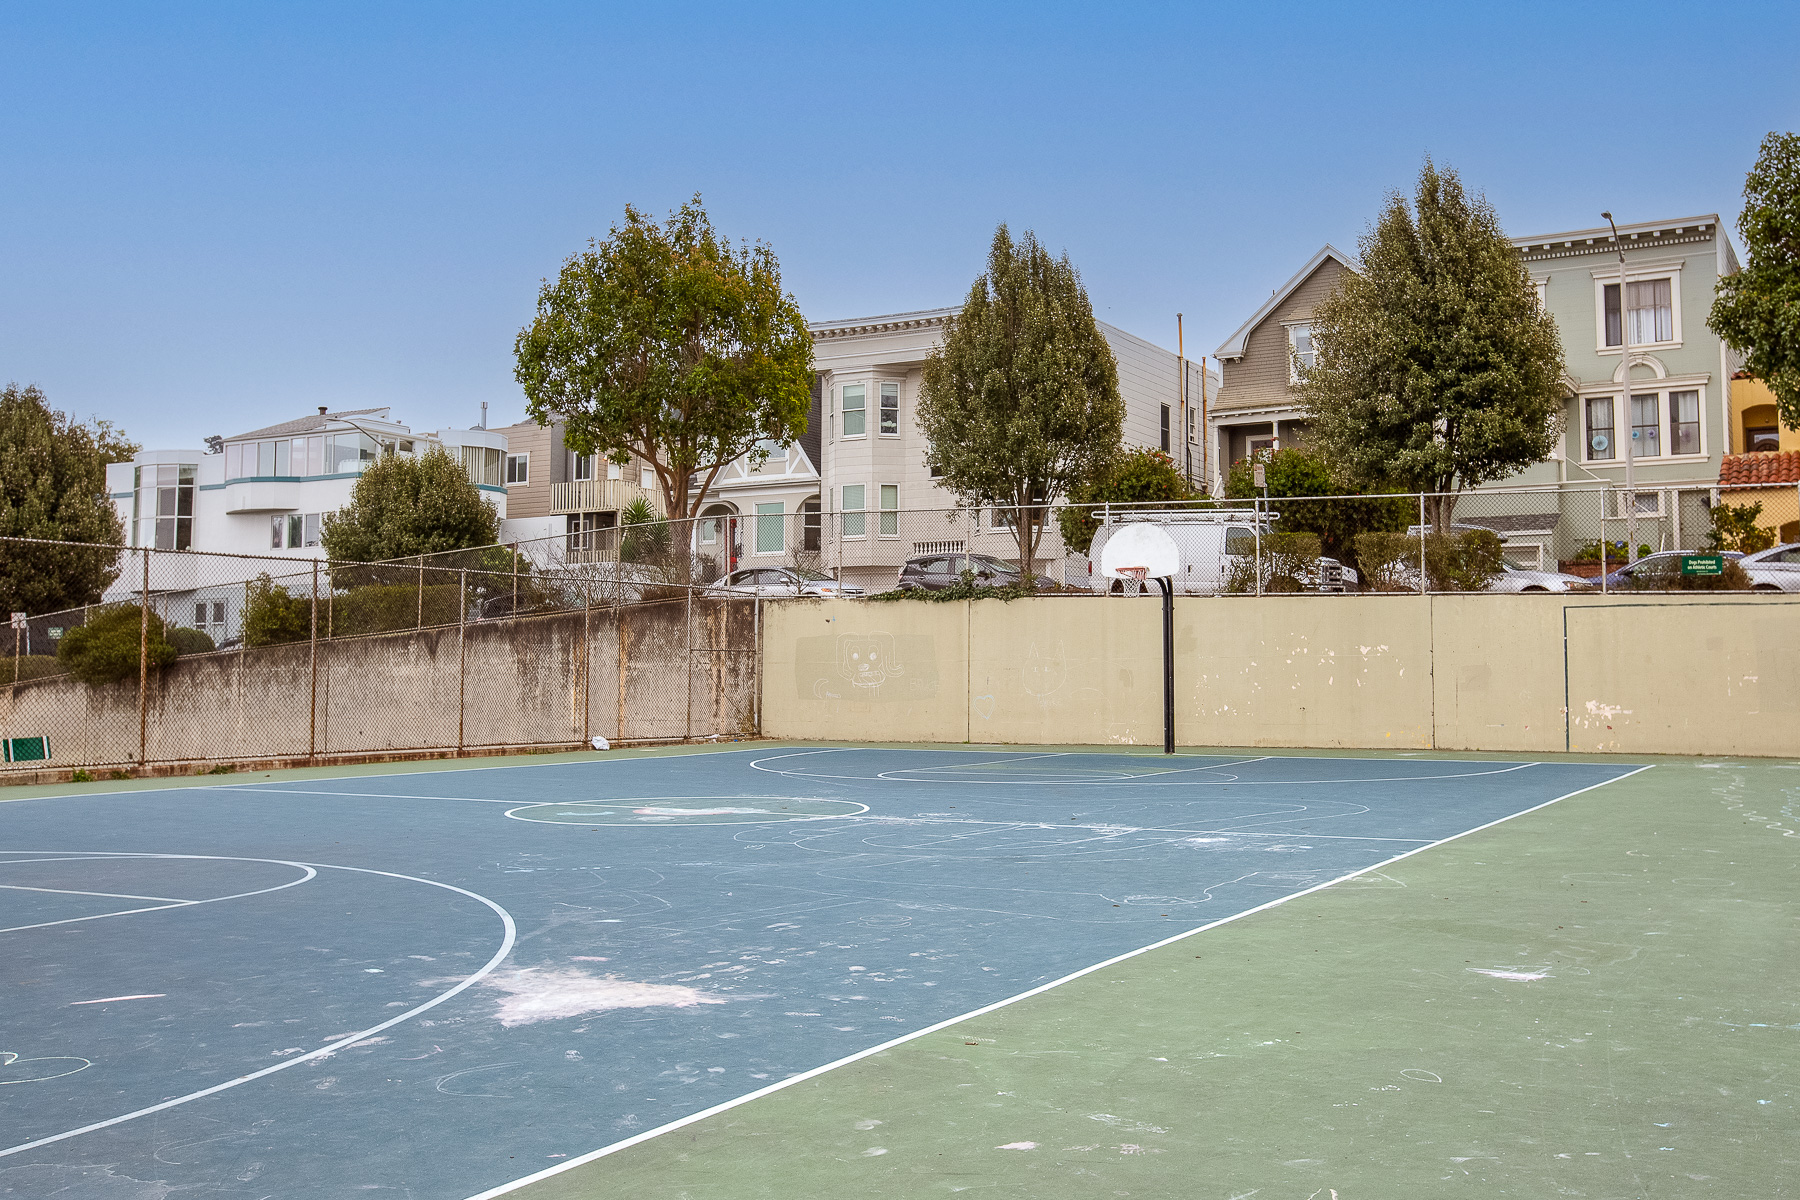 Property Photo: Basketball court at nearby Grattan Playground